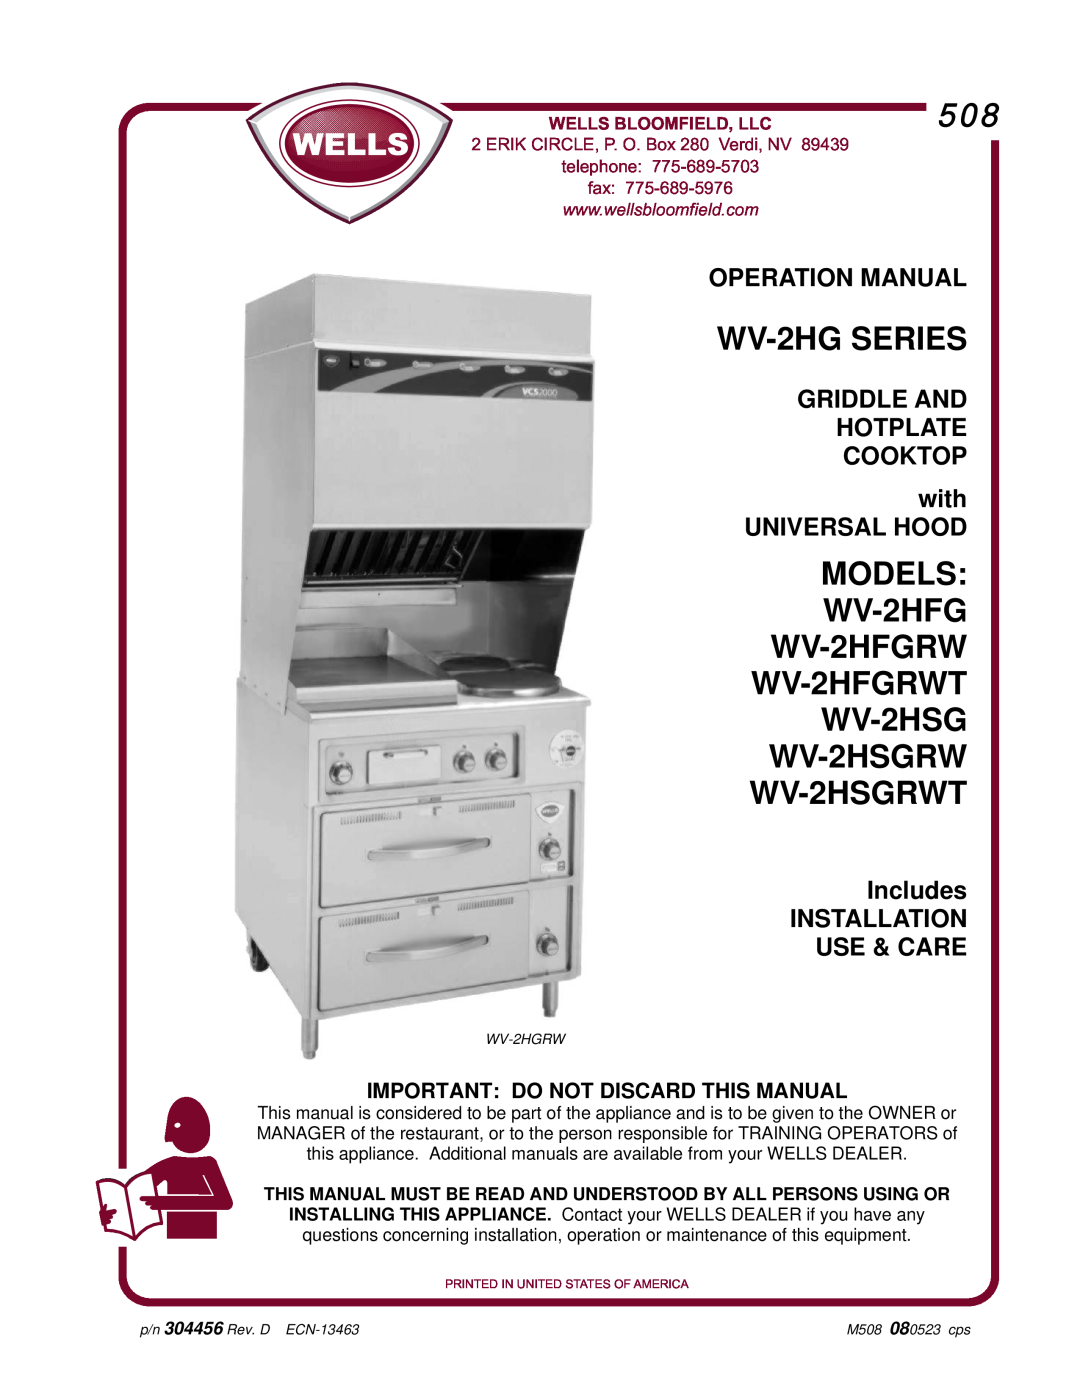 Bloomfield WV-2HSGRWT operation manual Important Do Not Discard This Manual, Wells Bloomfield, Llc, fax, WV-2HGSERIES 